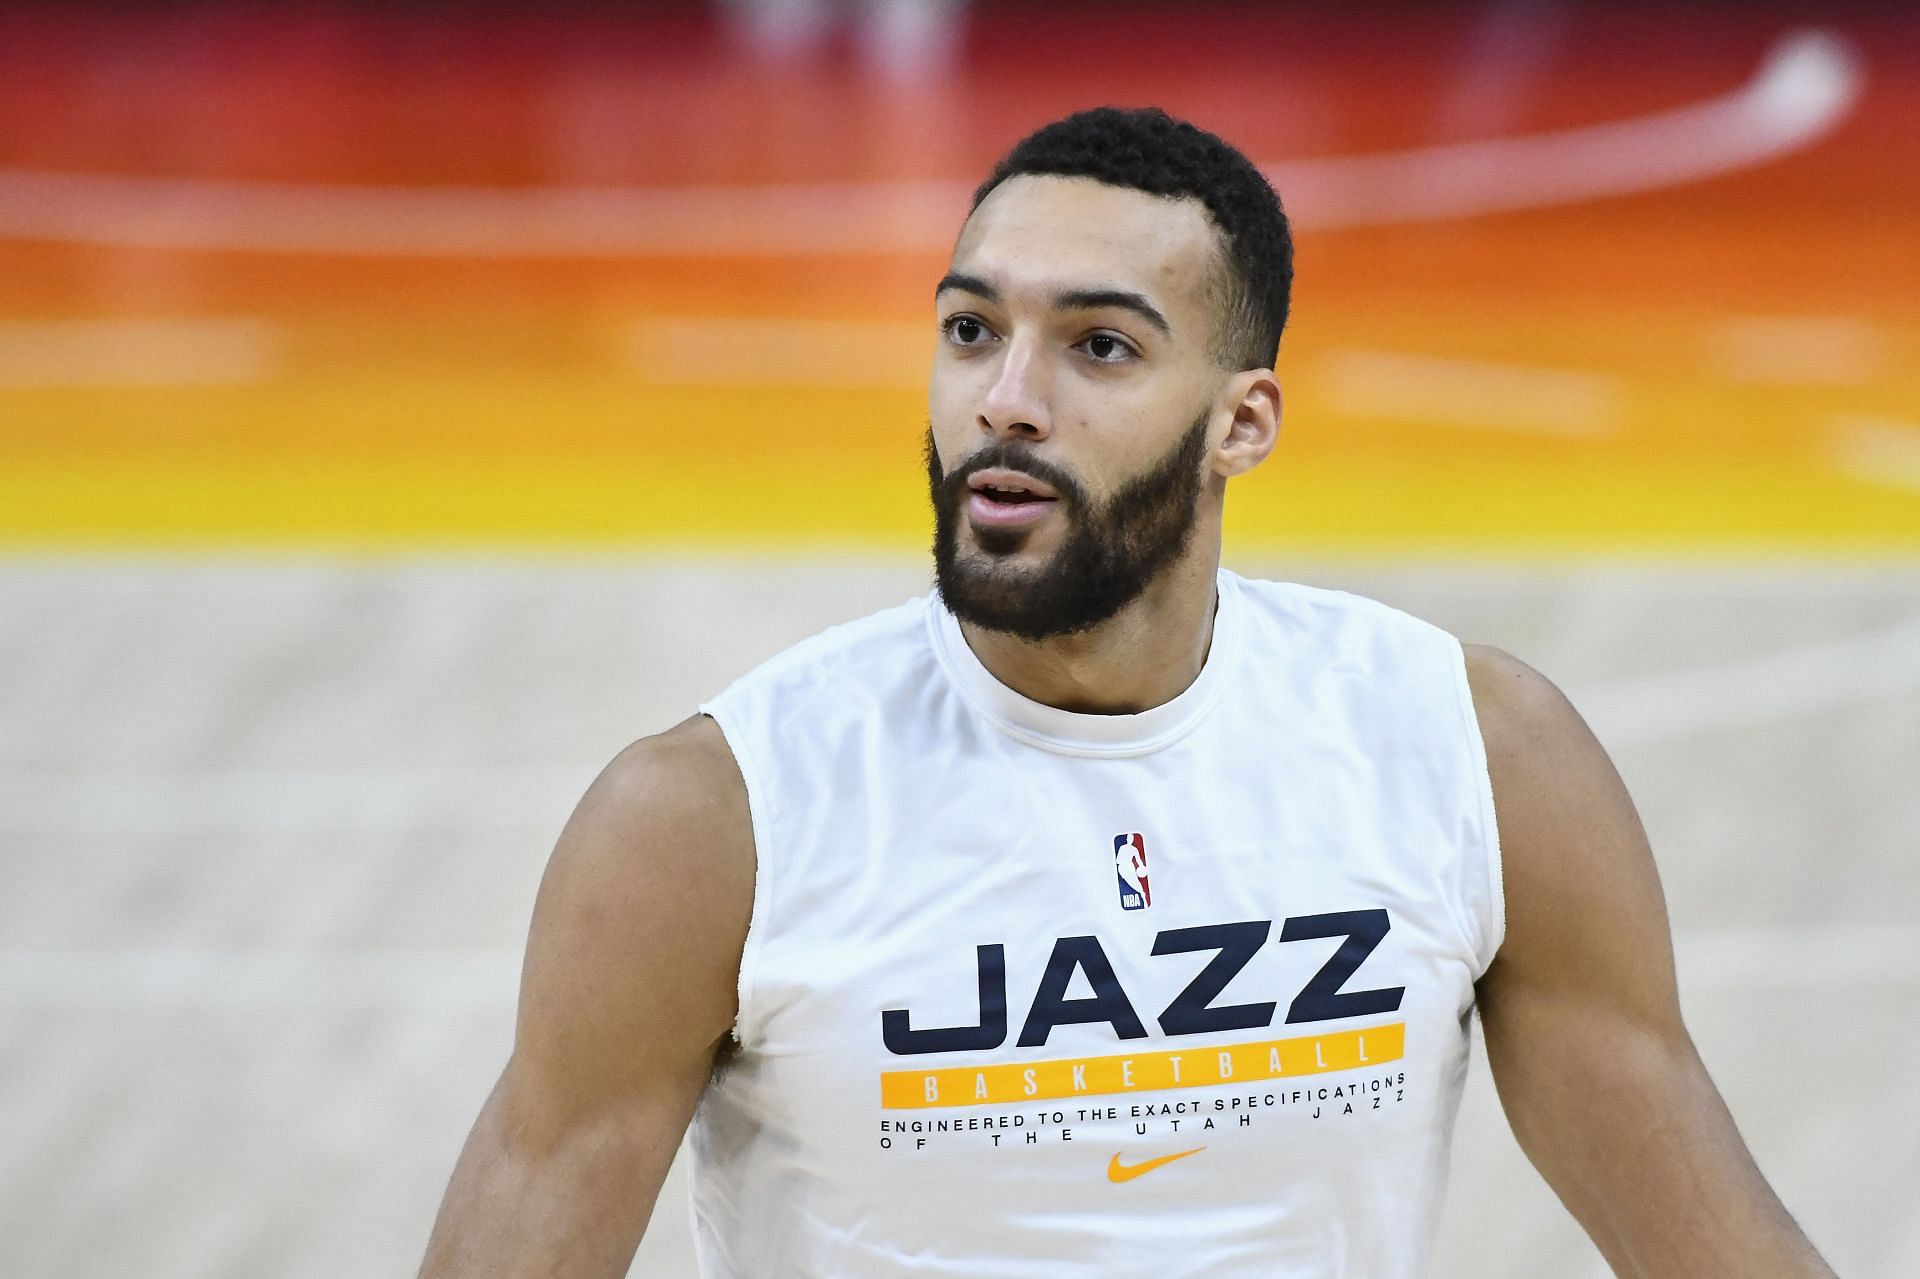 Utah Jazz big man Rudy Gobert continues to heat up in the Defensive Player of the Year conversation.